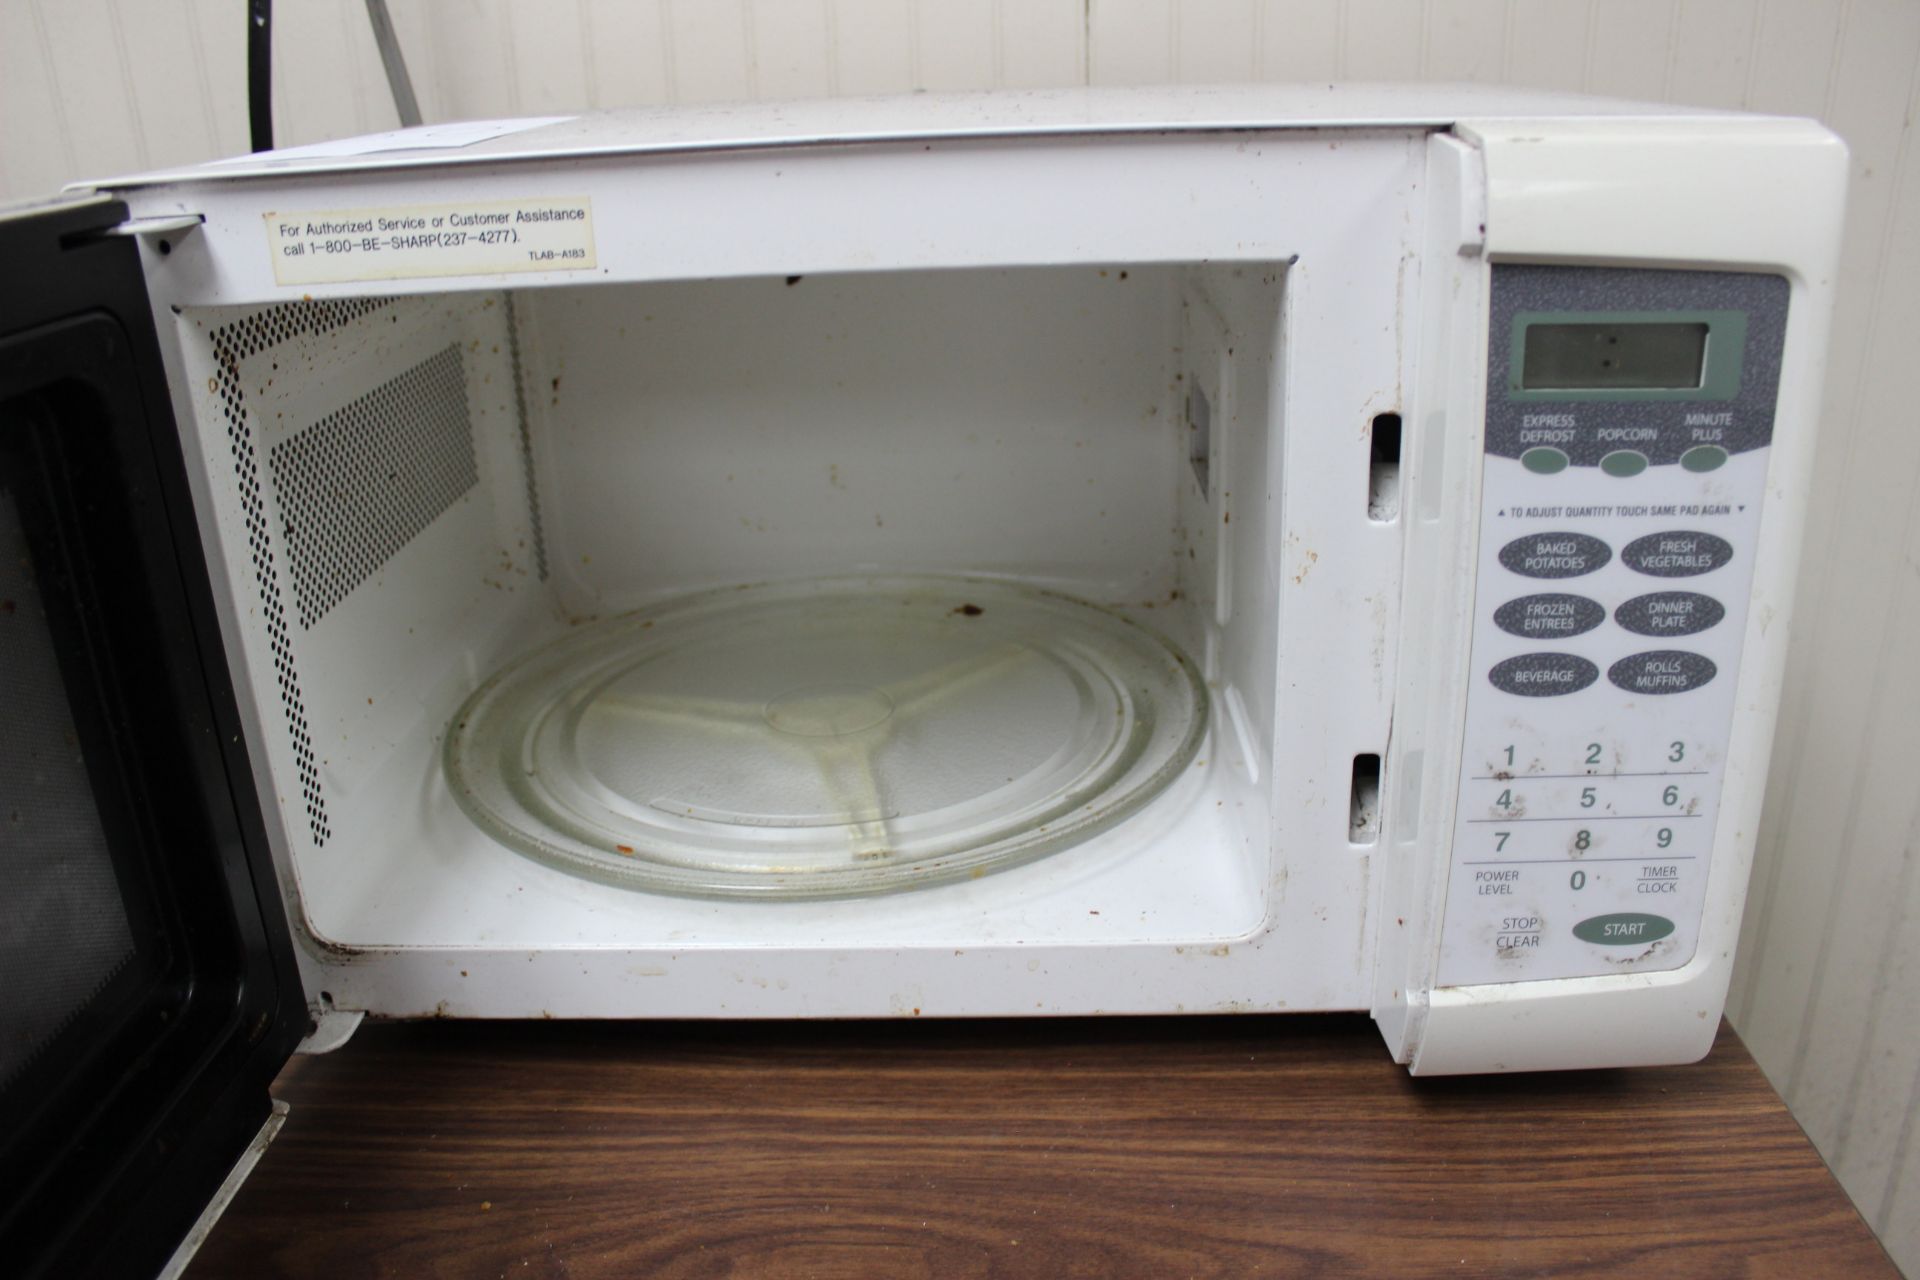 Sharp Carousel Microwave Model R-209FW S/N 370871 - Located In Bristol, TN - Image 2 of 2